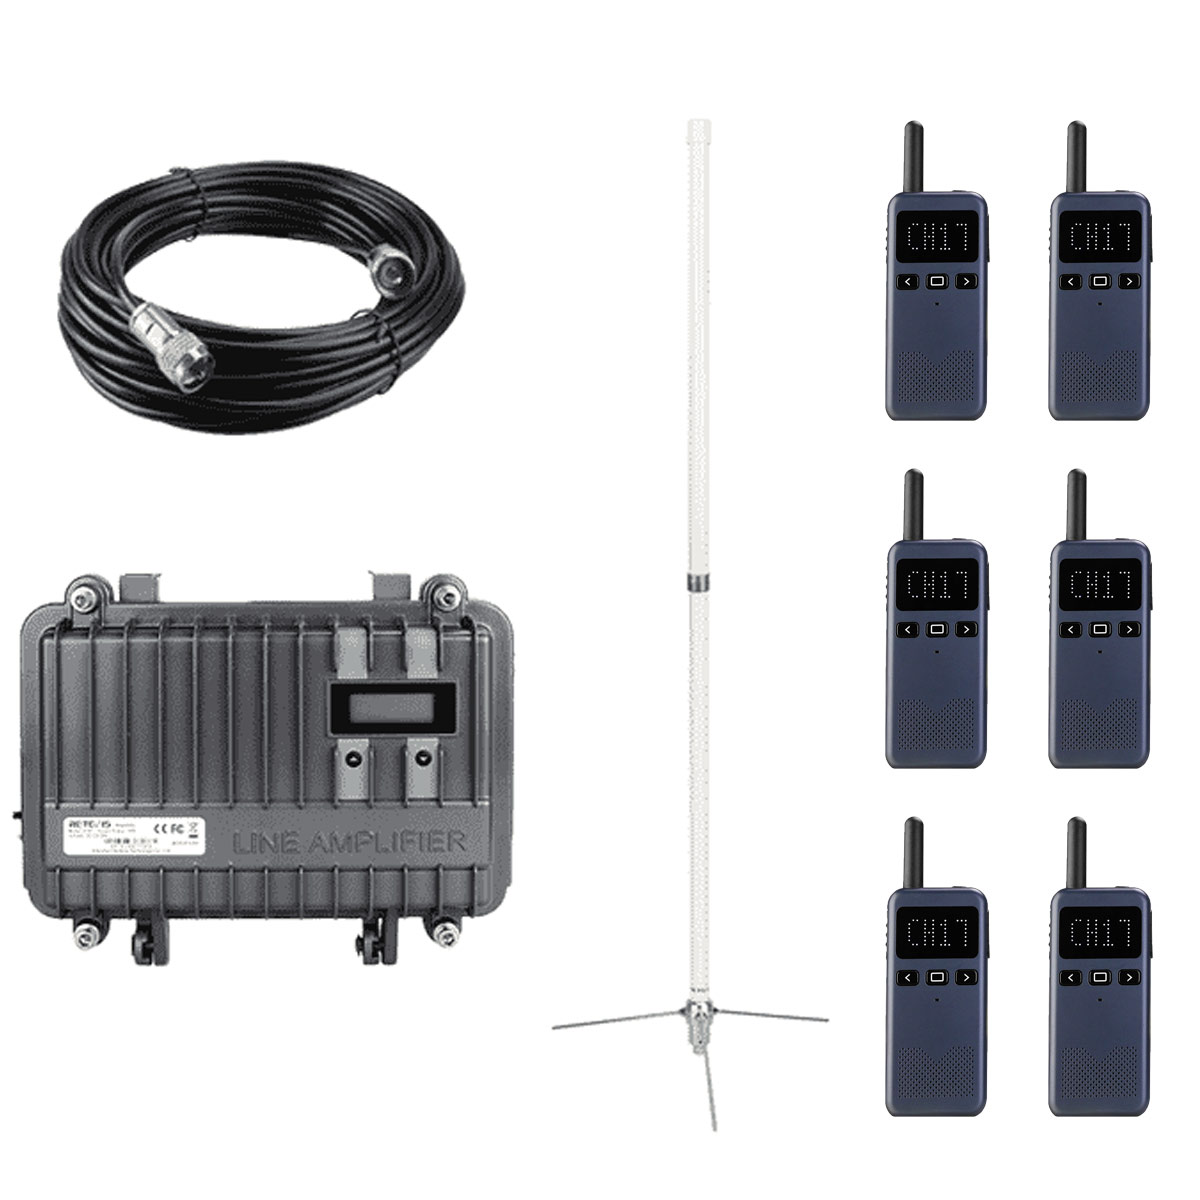 RT97 GMRS Repeater and RB19P 6 pack – Farm Team Bundles